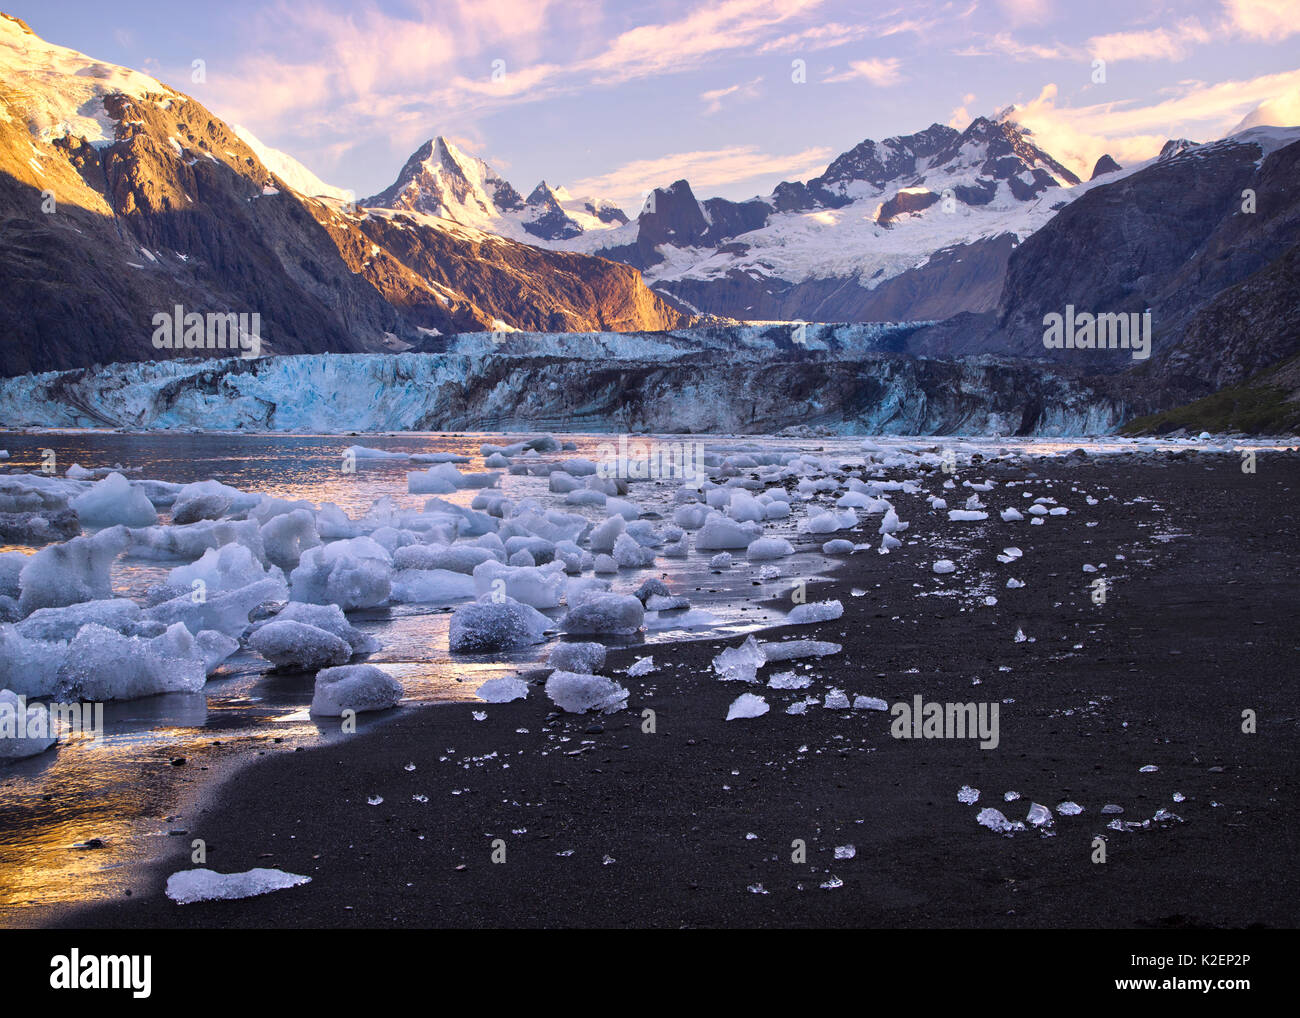 Icebergs collecting at low tide on a black sand beach at the head of the Johns Hopkins Inlet, with a view of the Johns Hopkins Glacier and the Fairweather Mountains, Glacier Bay National Park, Alaska, USA, August 2014. Stock Photo